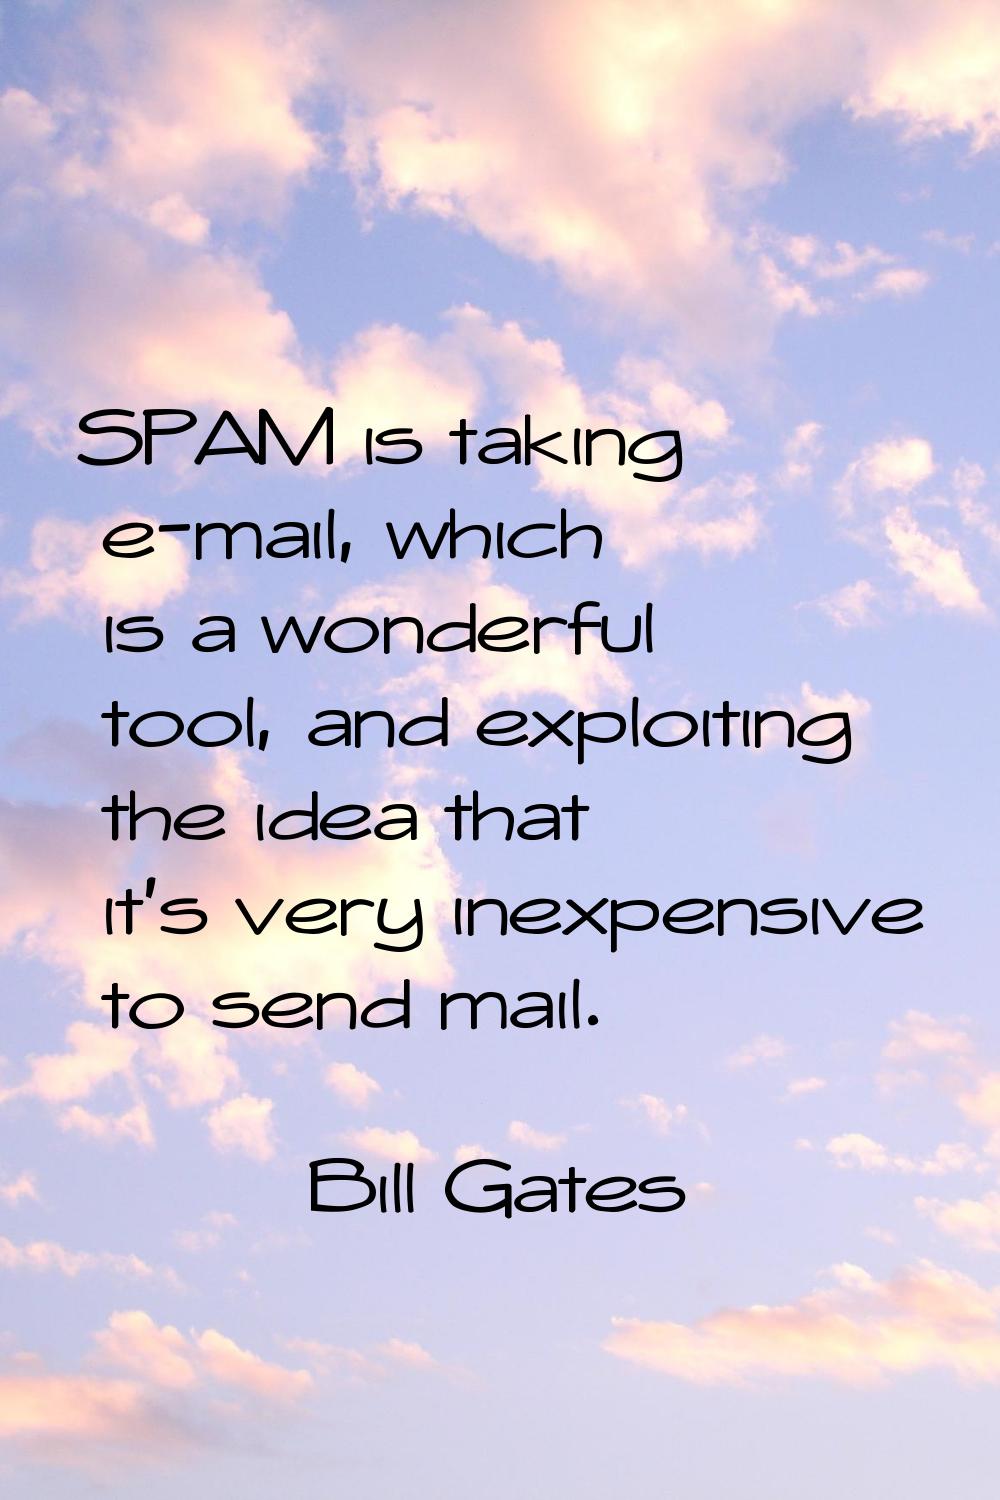 SPAM is taking e-mail, which is a wonderful tool, and exploiting the idea that it's very inexpensiv